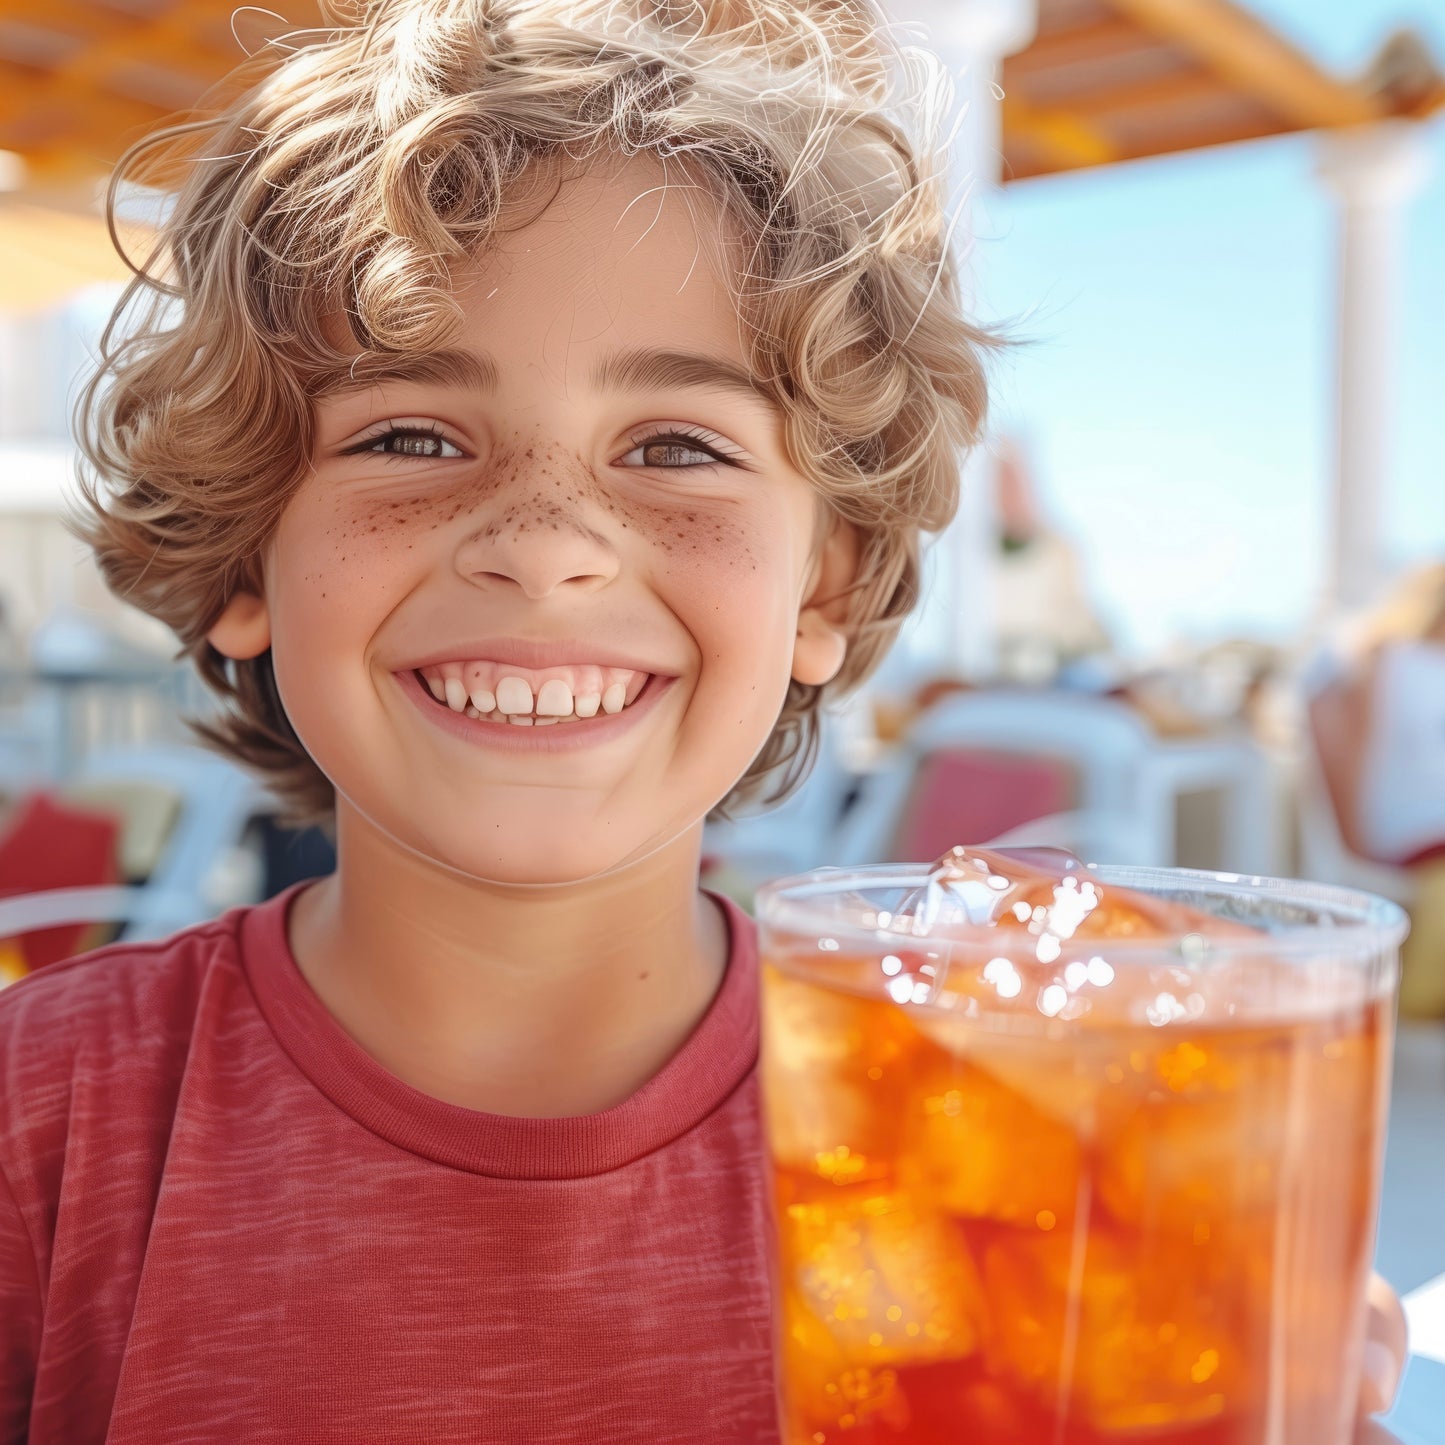 Why It's Time to Swap Soda for 'Wee' - A Herbal Brew for Our Young Ones